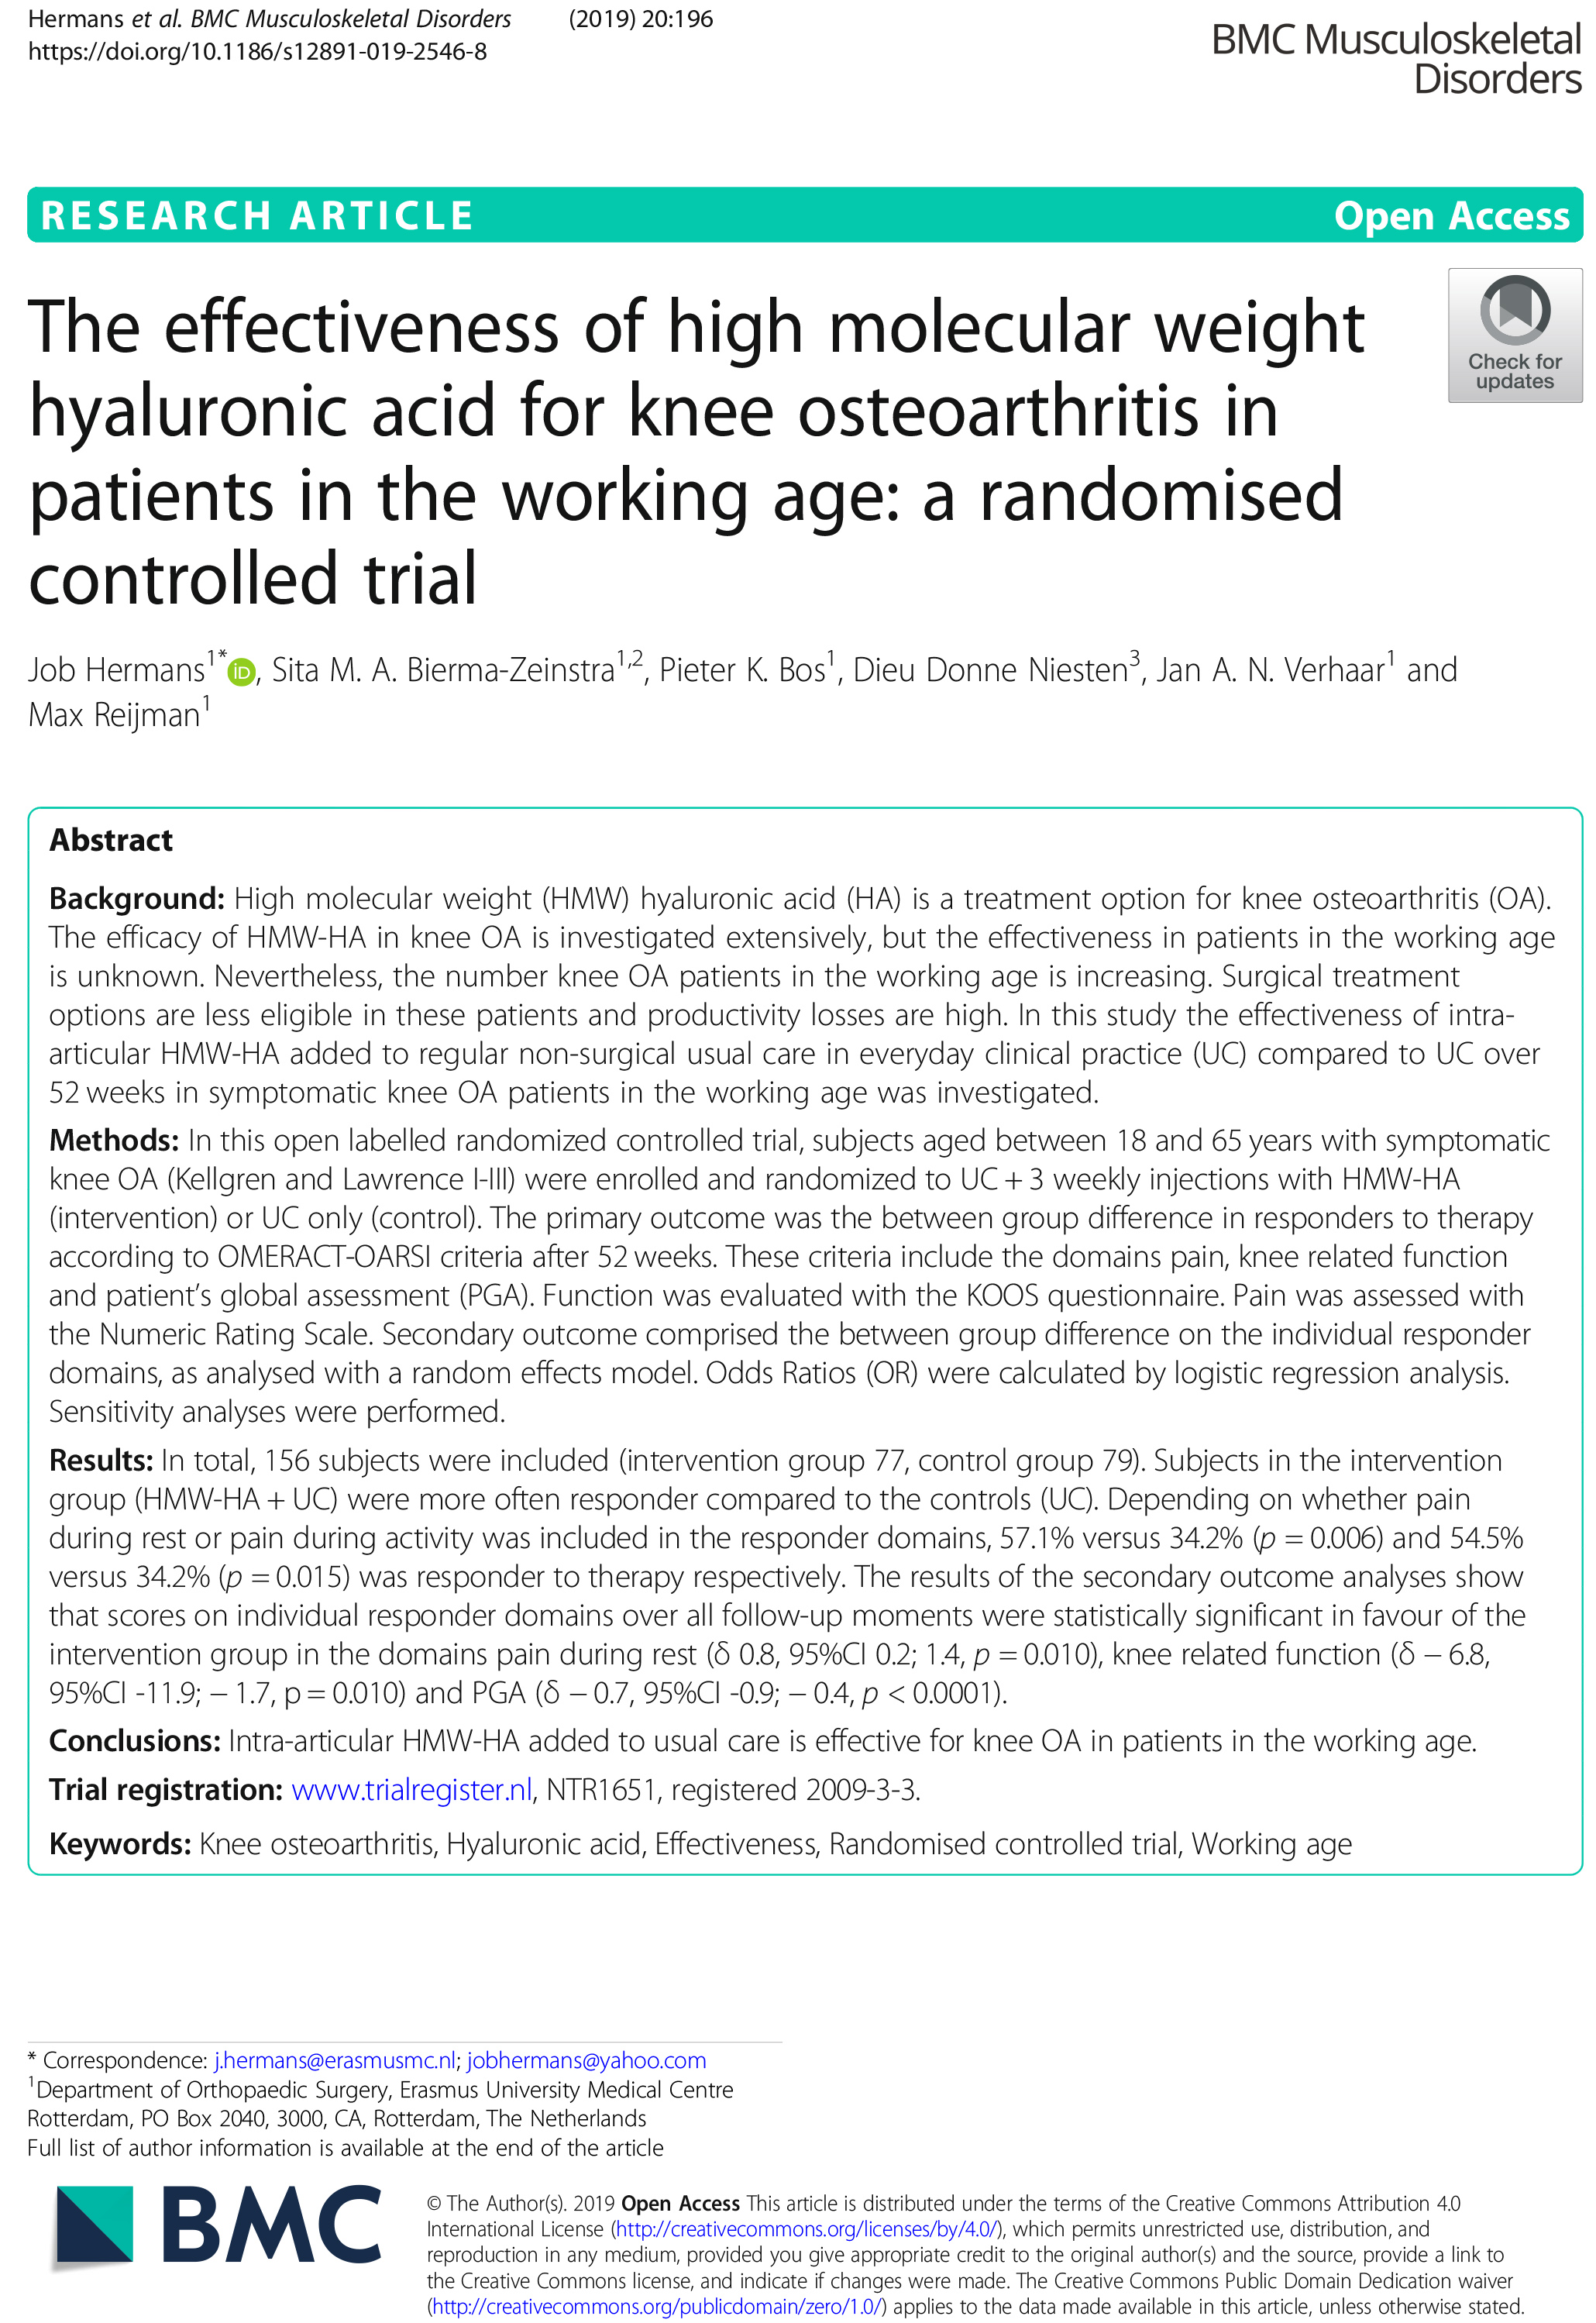 The_effectivofhigh_molecular_weight_hyaluronic_acid_for_knee_osteoarthritis_in_patients-1.jpg